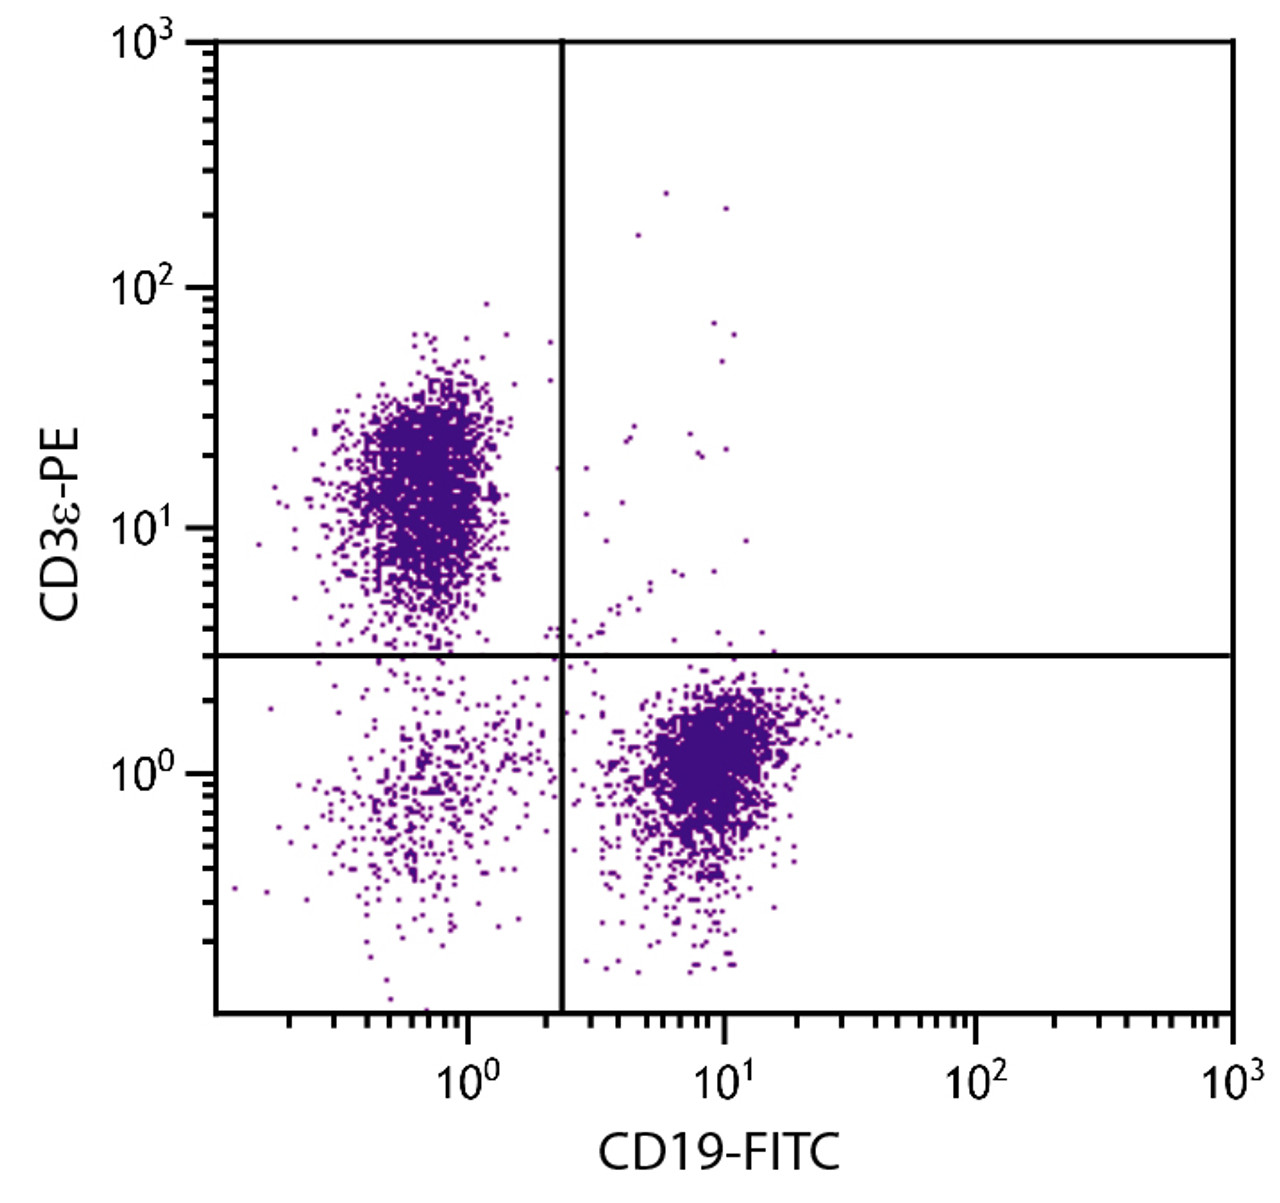 BALB/c mouse splenocytes were stained with Hamster Anti-Mouse CD3?-PE (Cat. No. 98-561) and Rat Anti-Mouse CD19-FITC .